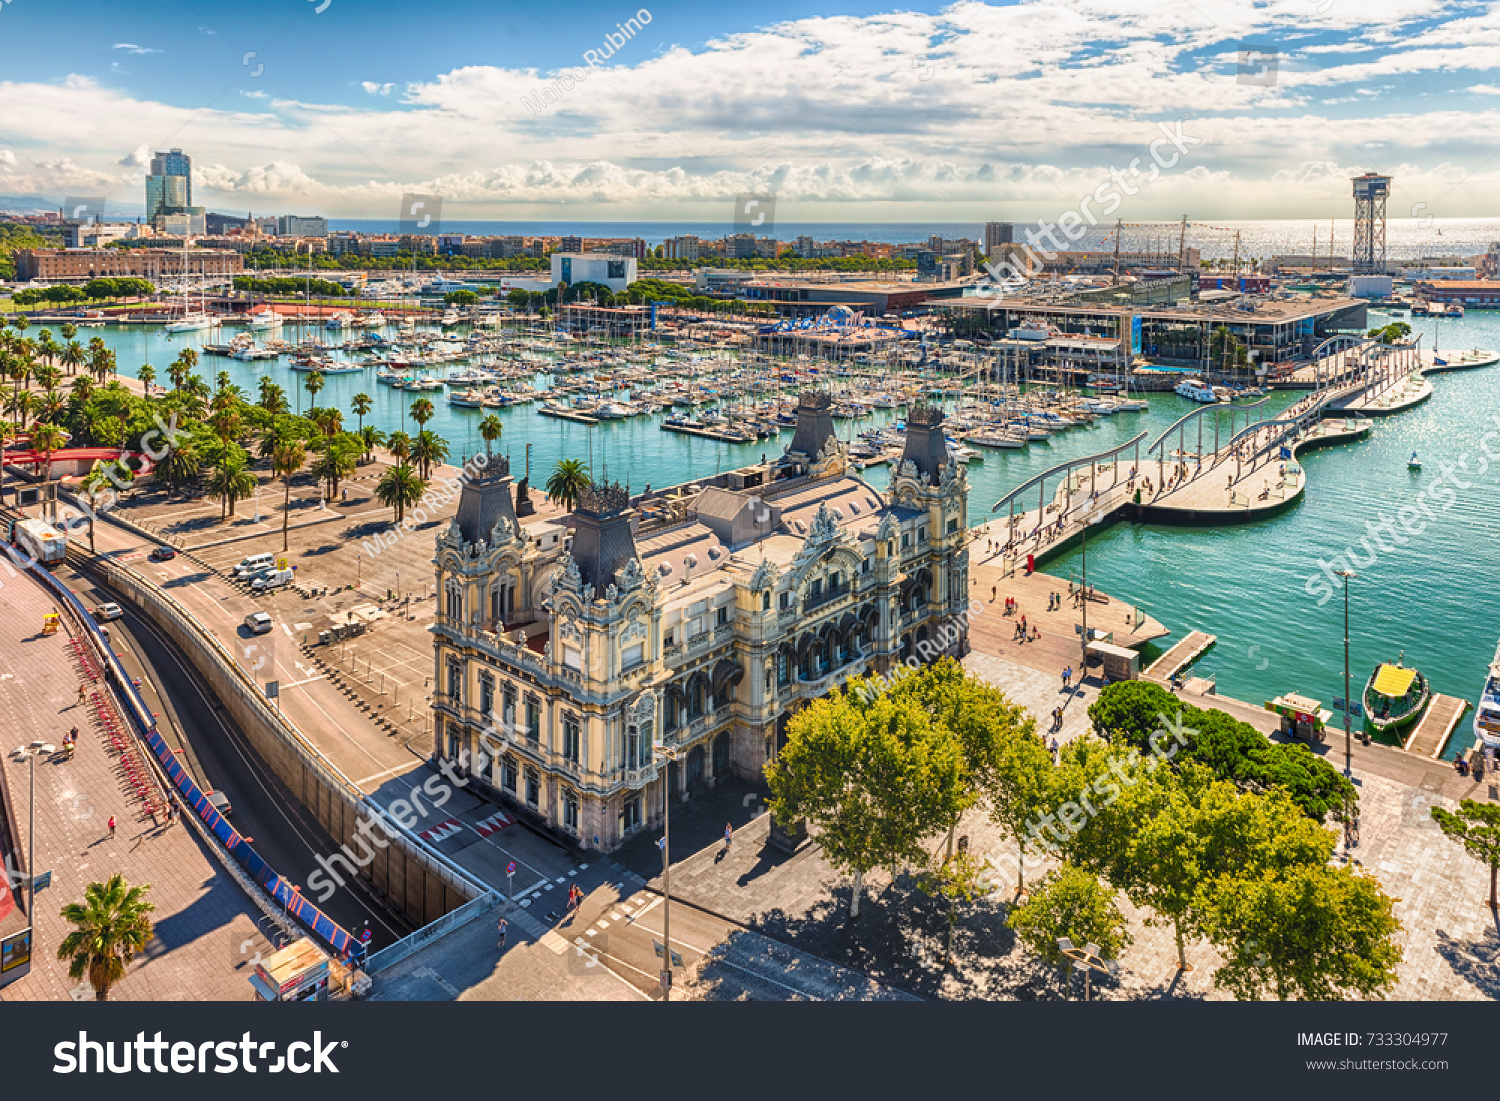 23,031 Port of barcelona Stock Photos, Images & Photography | Shutterstock